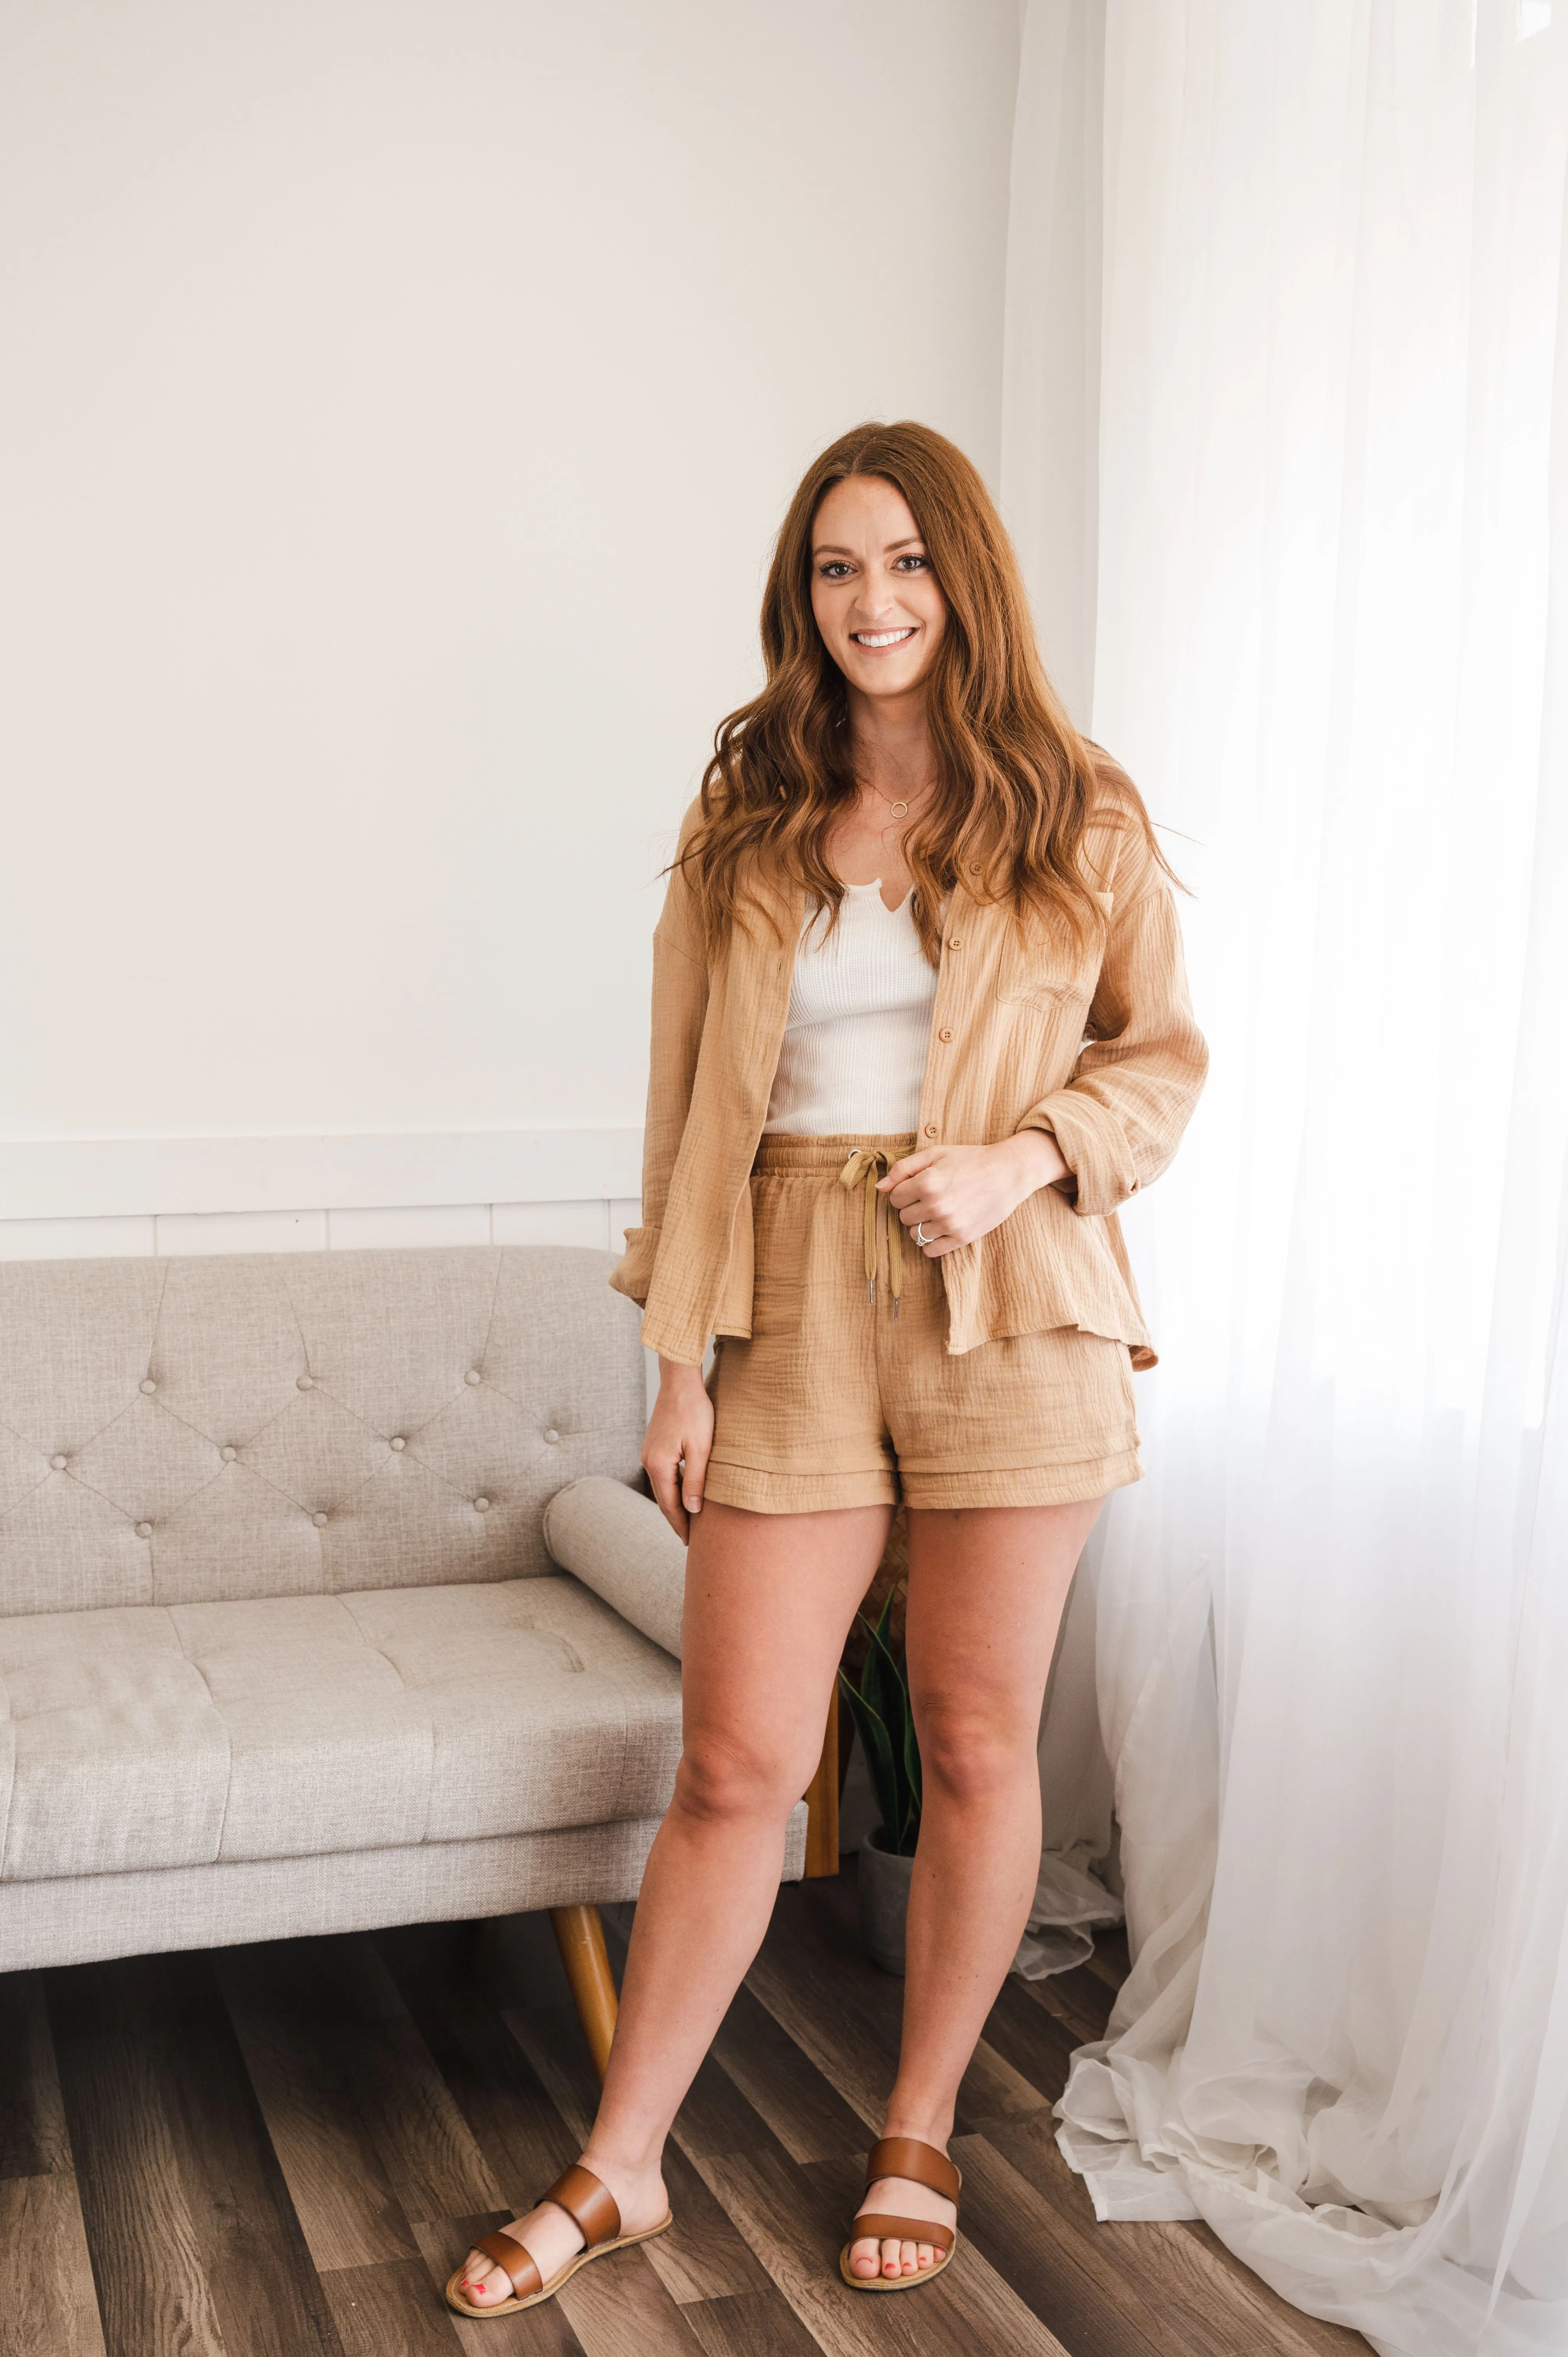 Young woman standing in a well-lit room wearing a casual tan-colored suit with shorts, white top, and sandals, smiling at the camera with a sheer curtain and a beige couch in the background.